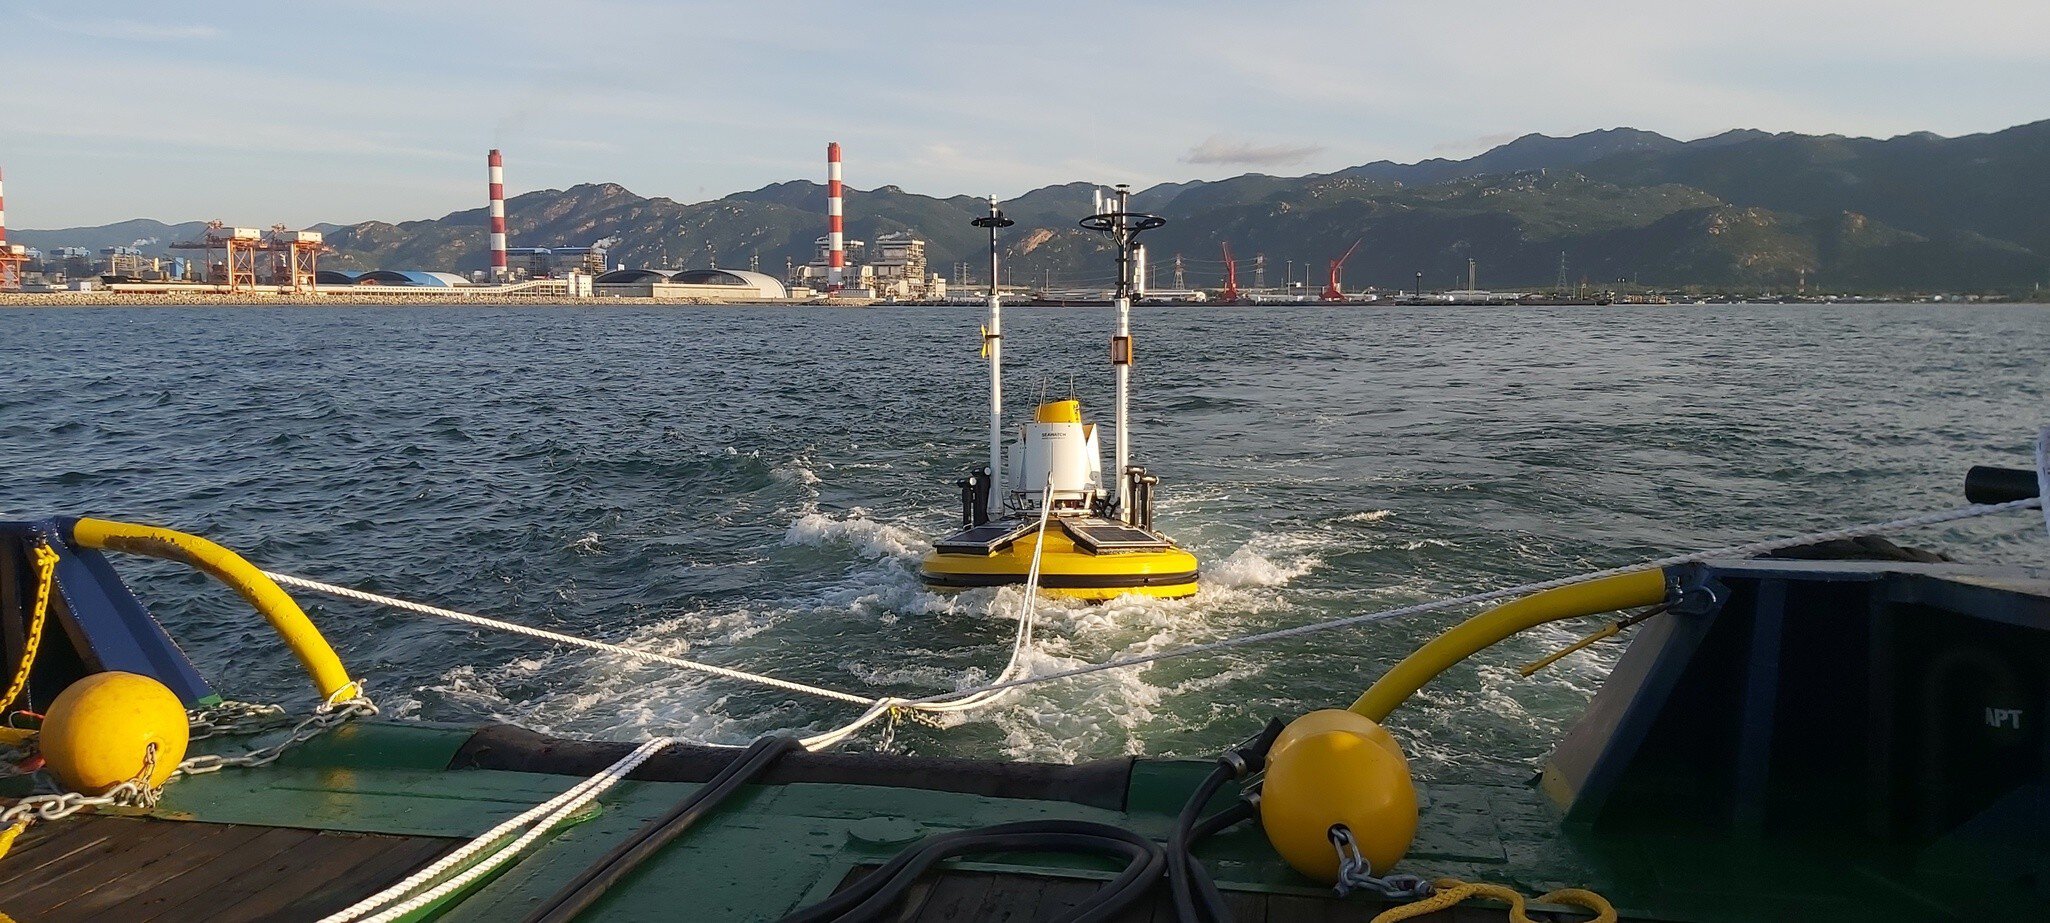 A SEAWATCH® wind lidar buoy deployed at Vietnam's Thang Long Offshore Wind Farm.
The buoy will use Fugro’s SEAWATCH Wavescan Buoy platform, which has integrated ZX 300M lidar, and will record wind measurements up to 300 m above sea level. Fugro and PTSC G&S will provide monthly Geo-data reports to support the validation of the area’s wind resources. The buoy will also capture a suite of metocean Geo-data, including air pressure, humidity, air and water temperature, wave height and full-column current measurements, to support the future wind farm’s engineering and design.